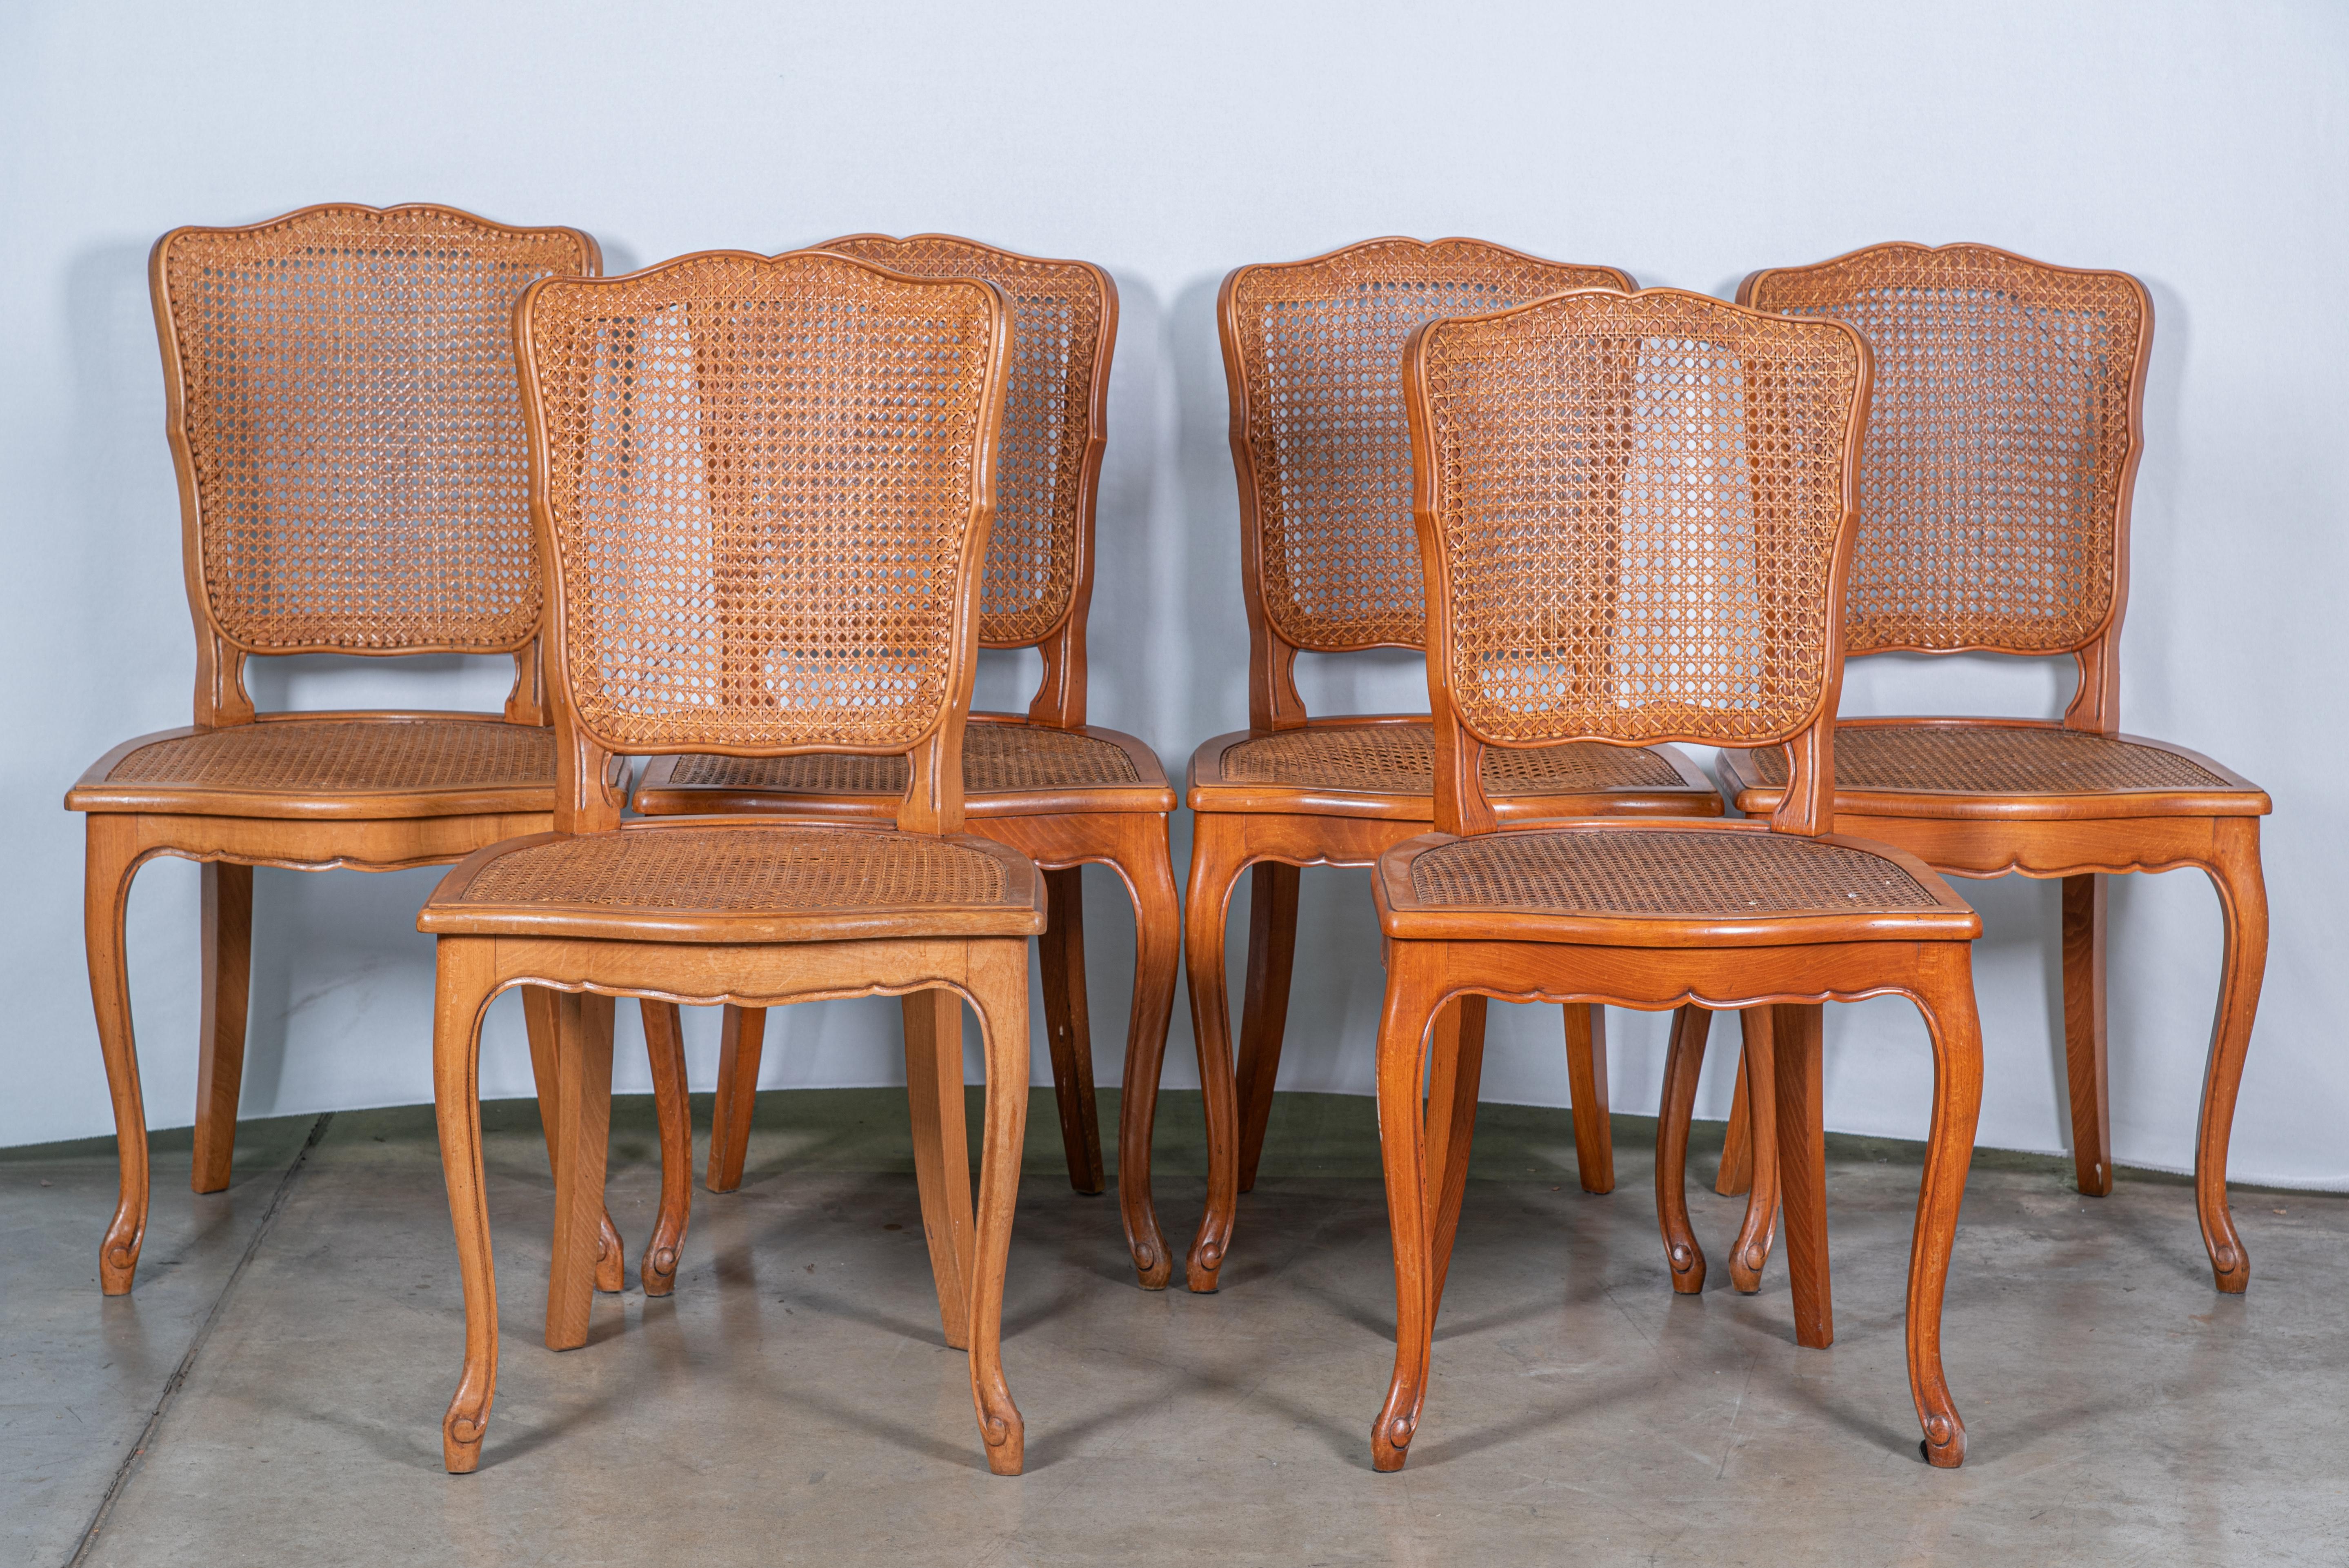 Elevate your dining experience with our captivating Set of Six Early 20th Century French Louis XIV Caned Dining Chairs. Crafted in the distinguished Louis XIV style, these chairs exude timeless elegance and sophistication. Each chair features